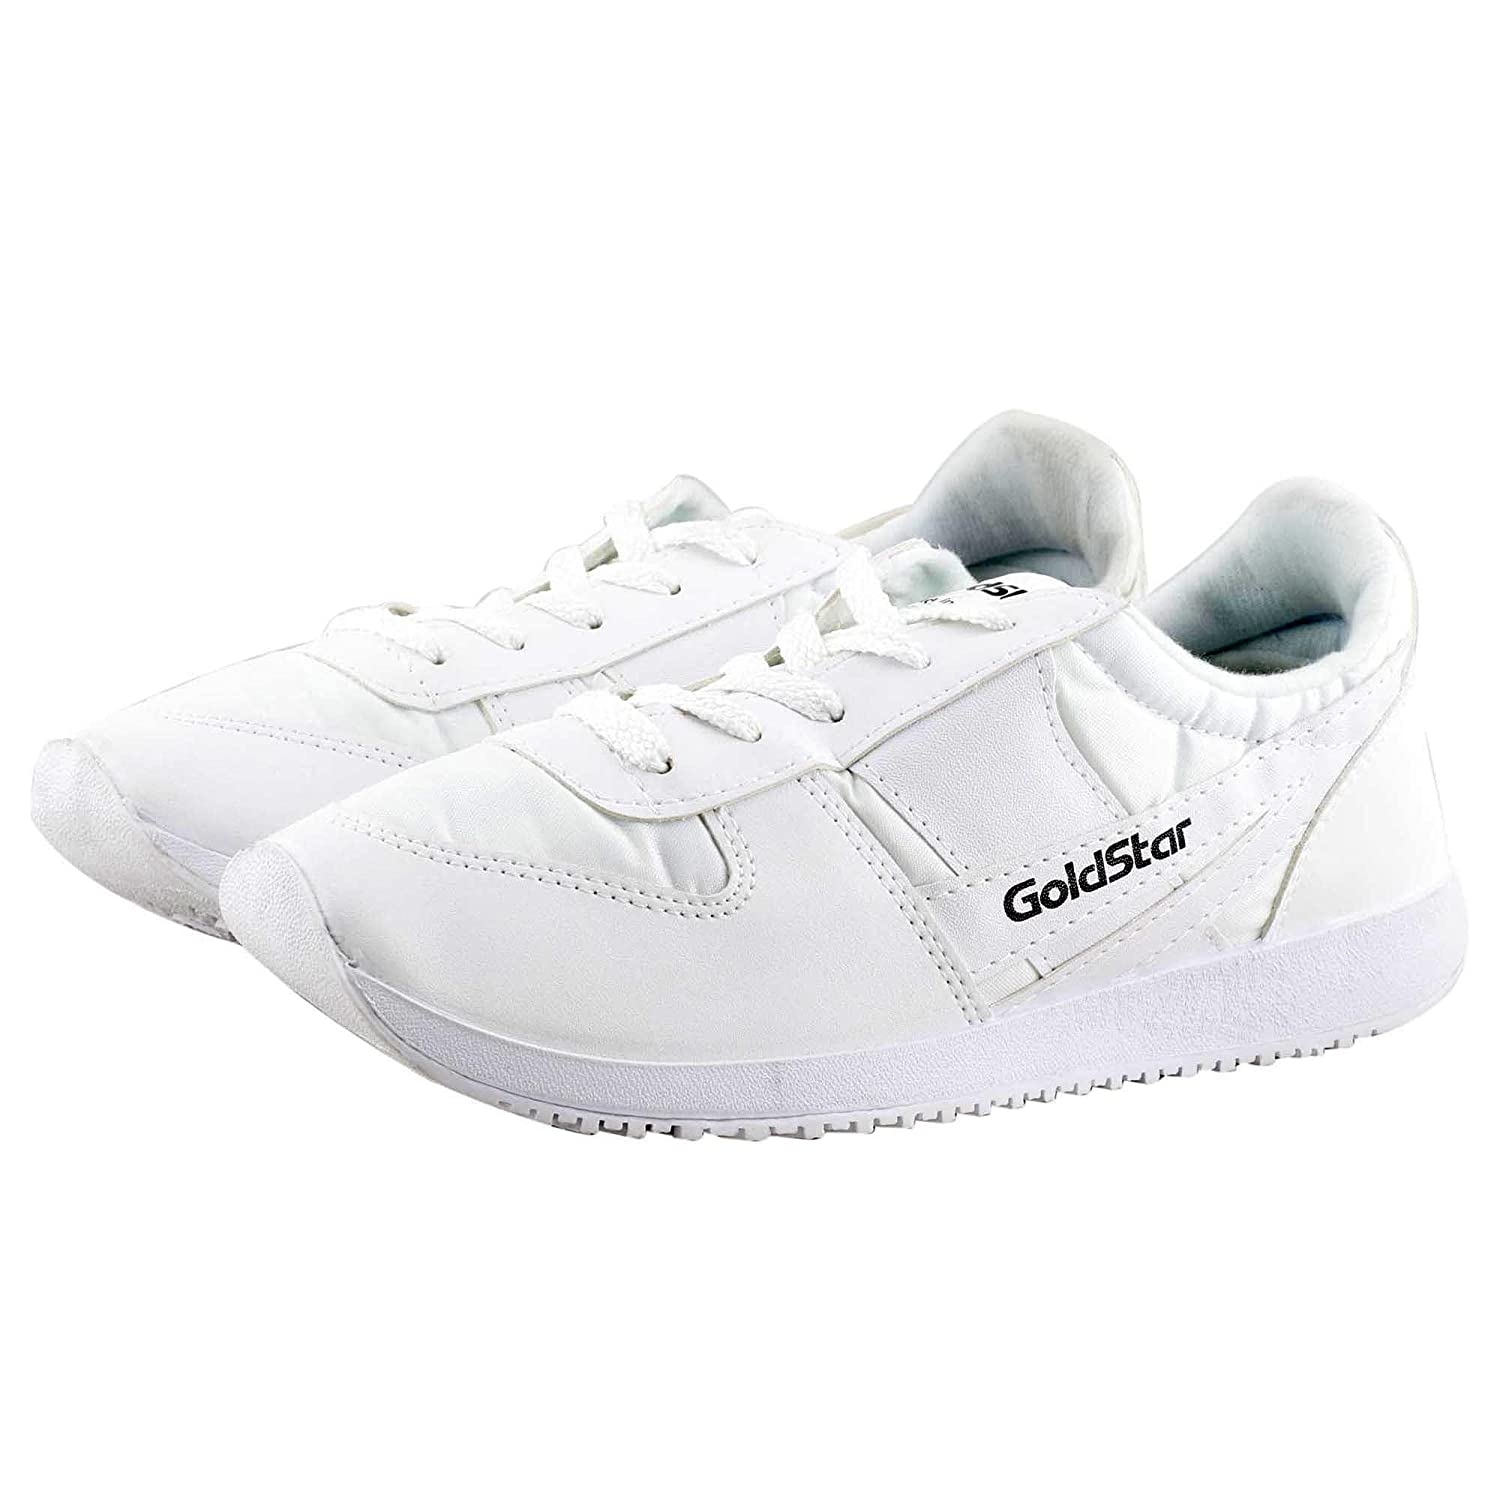 Goldstar | GOLDSTAR 32-White Nylon Lace-Up  Latest Stylish Lightweight Shoes for Running, Walking, Gym,Trekking, Hiking & Party Running Shoes for Men